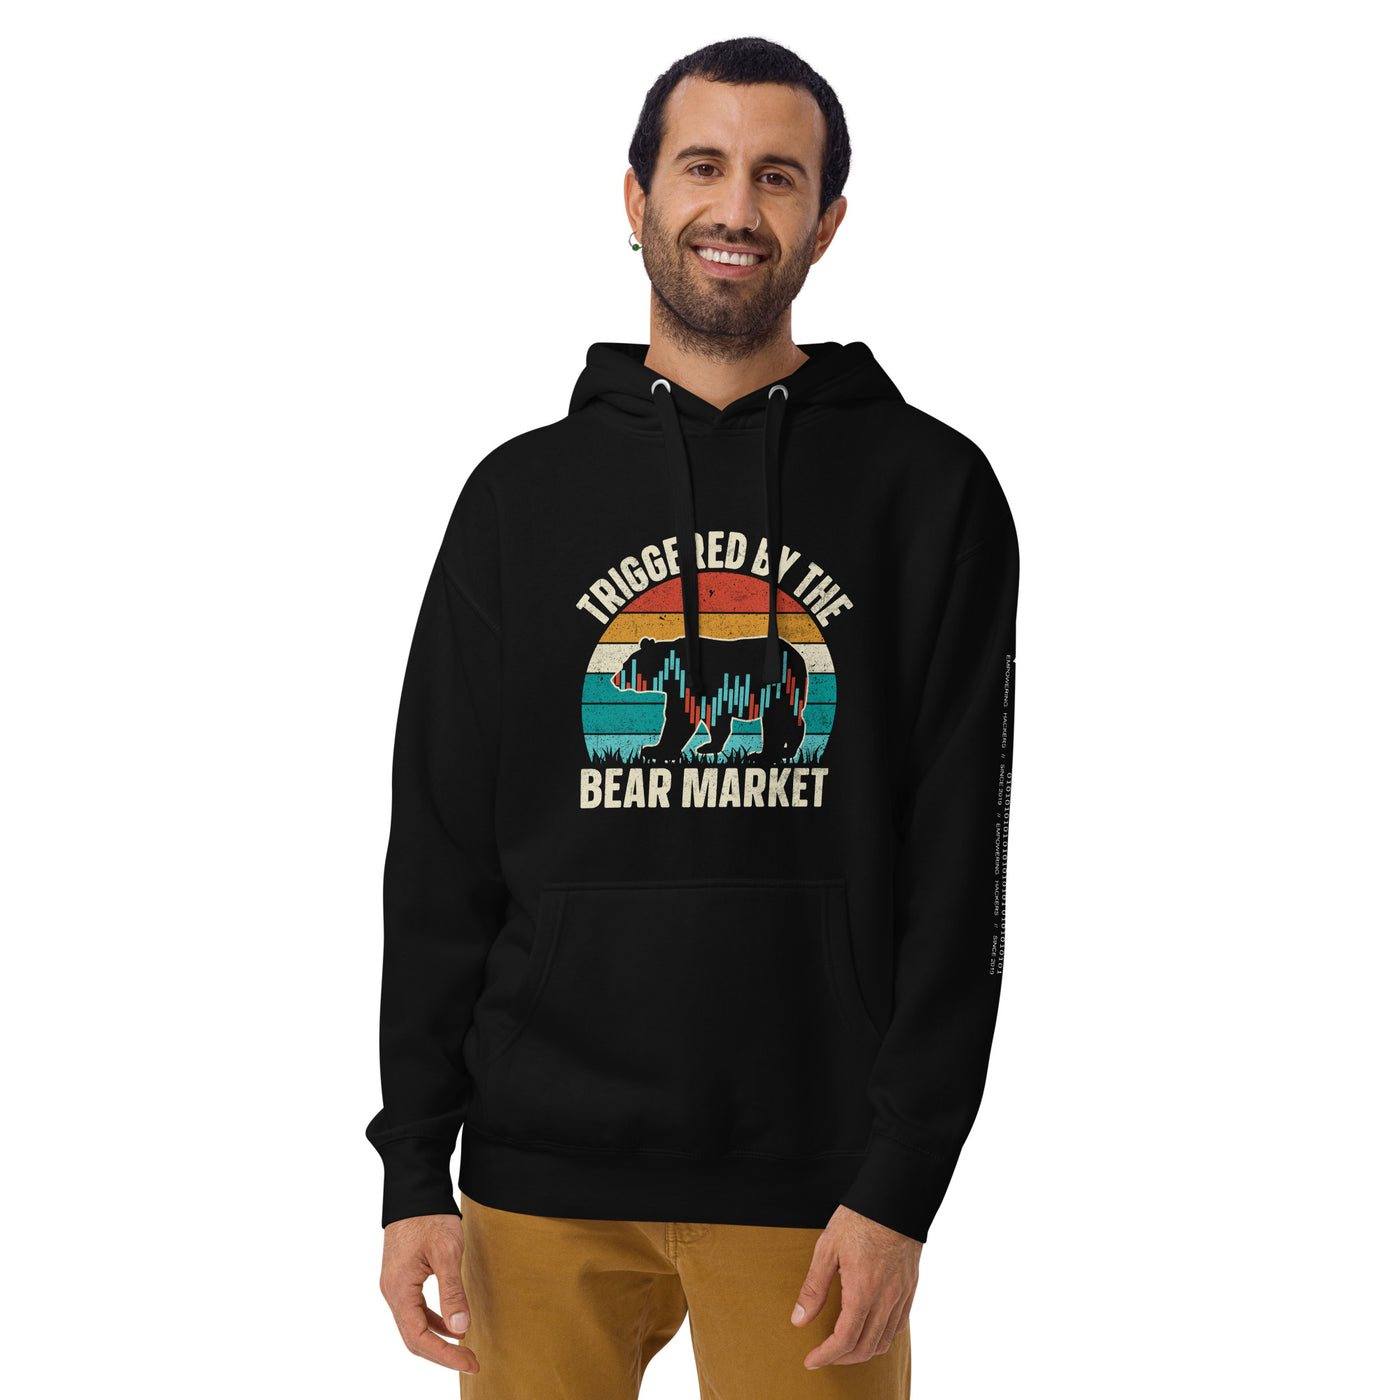 Triggered by the Bear Market - Unisex Hoodie